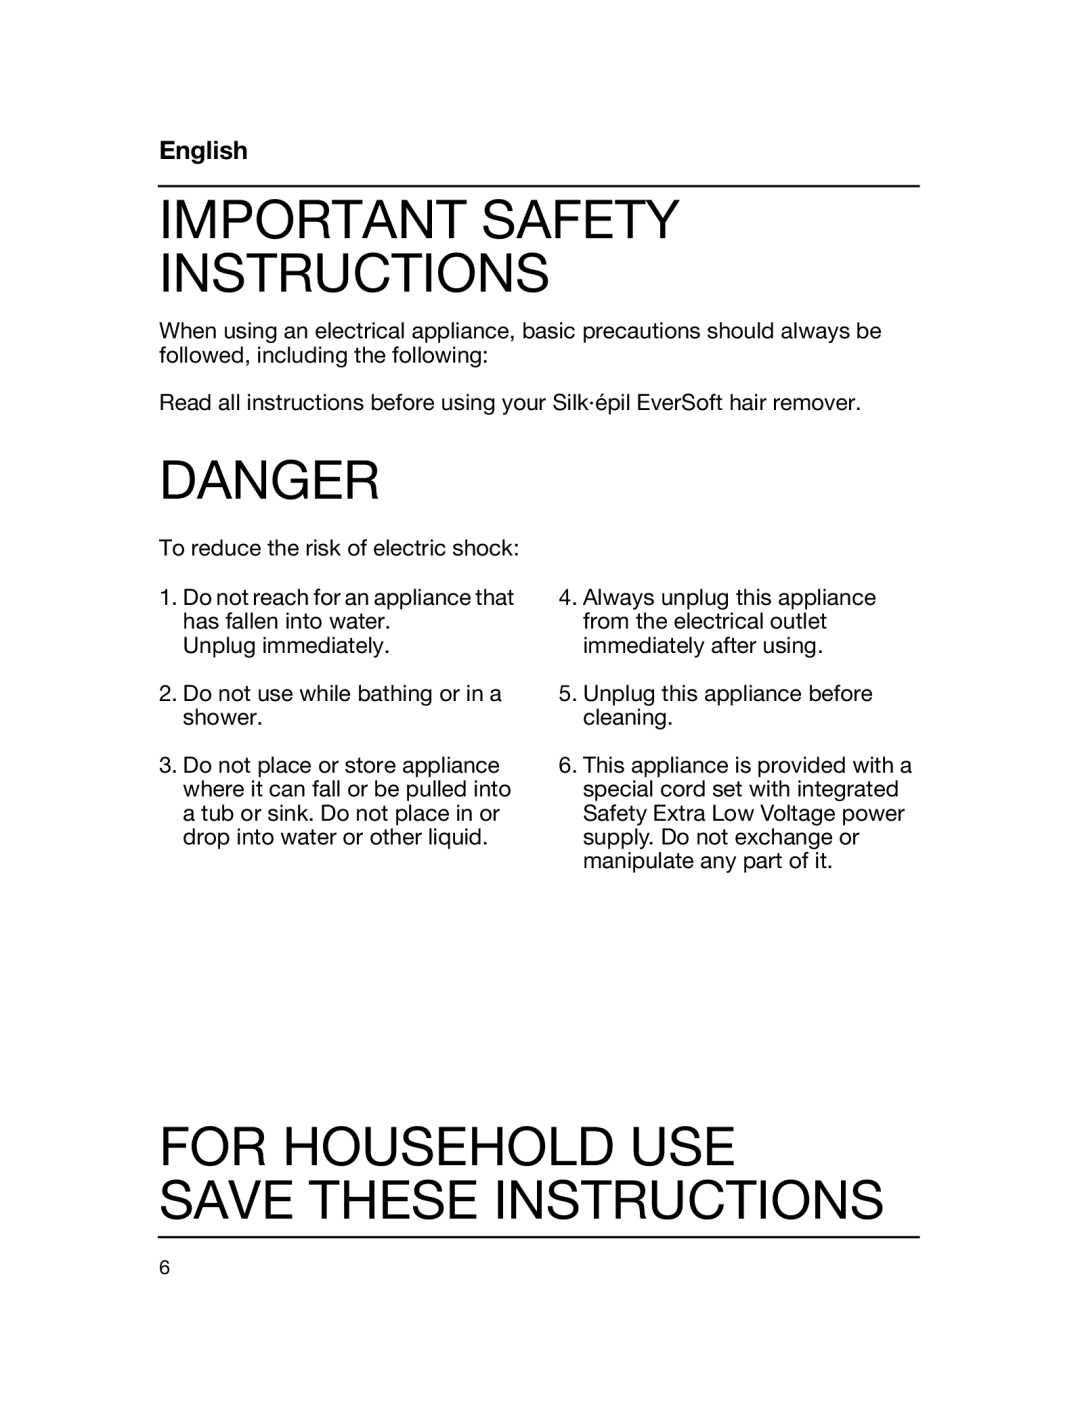 Braun 5316 manual Important Safety Instructions, Danger, For Household Use Save These Instructions, English 